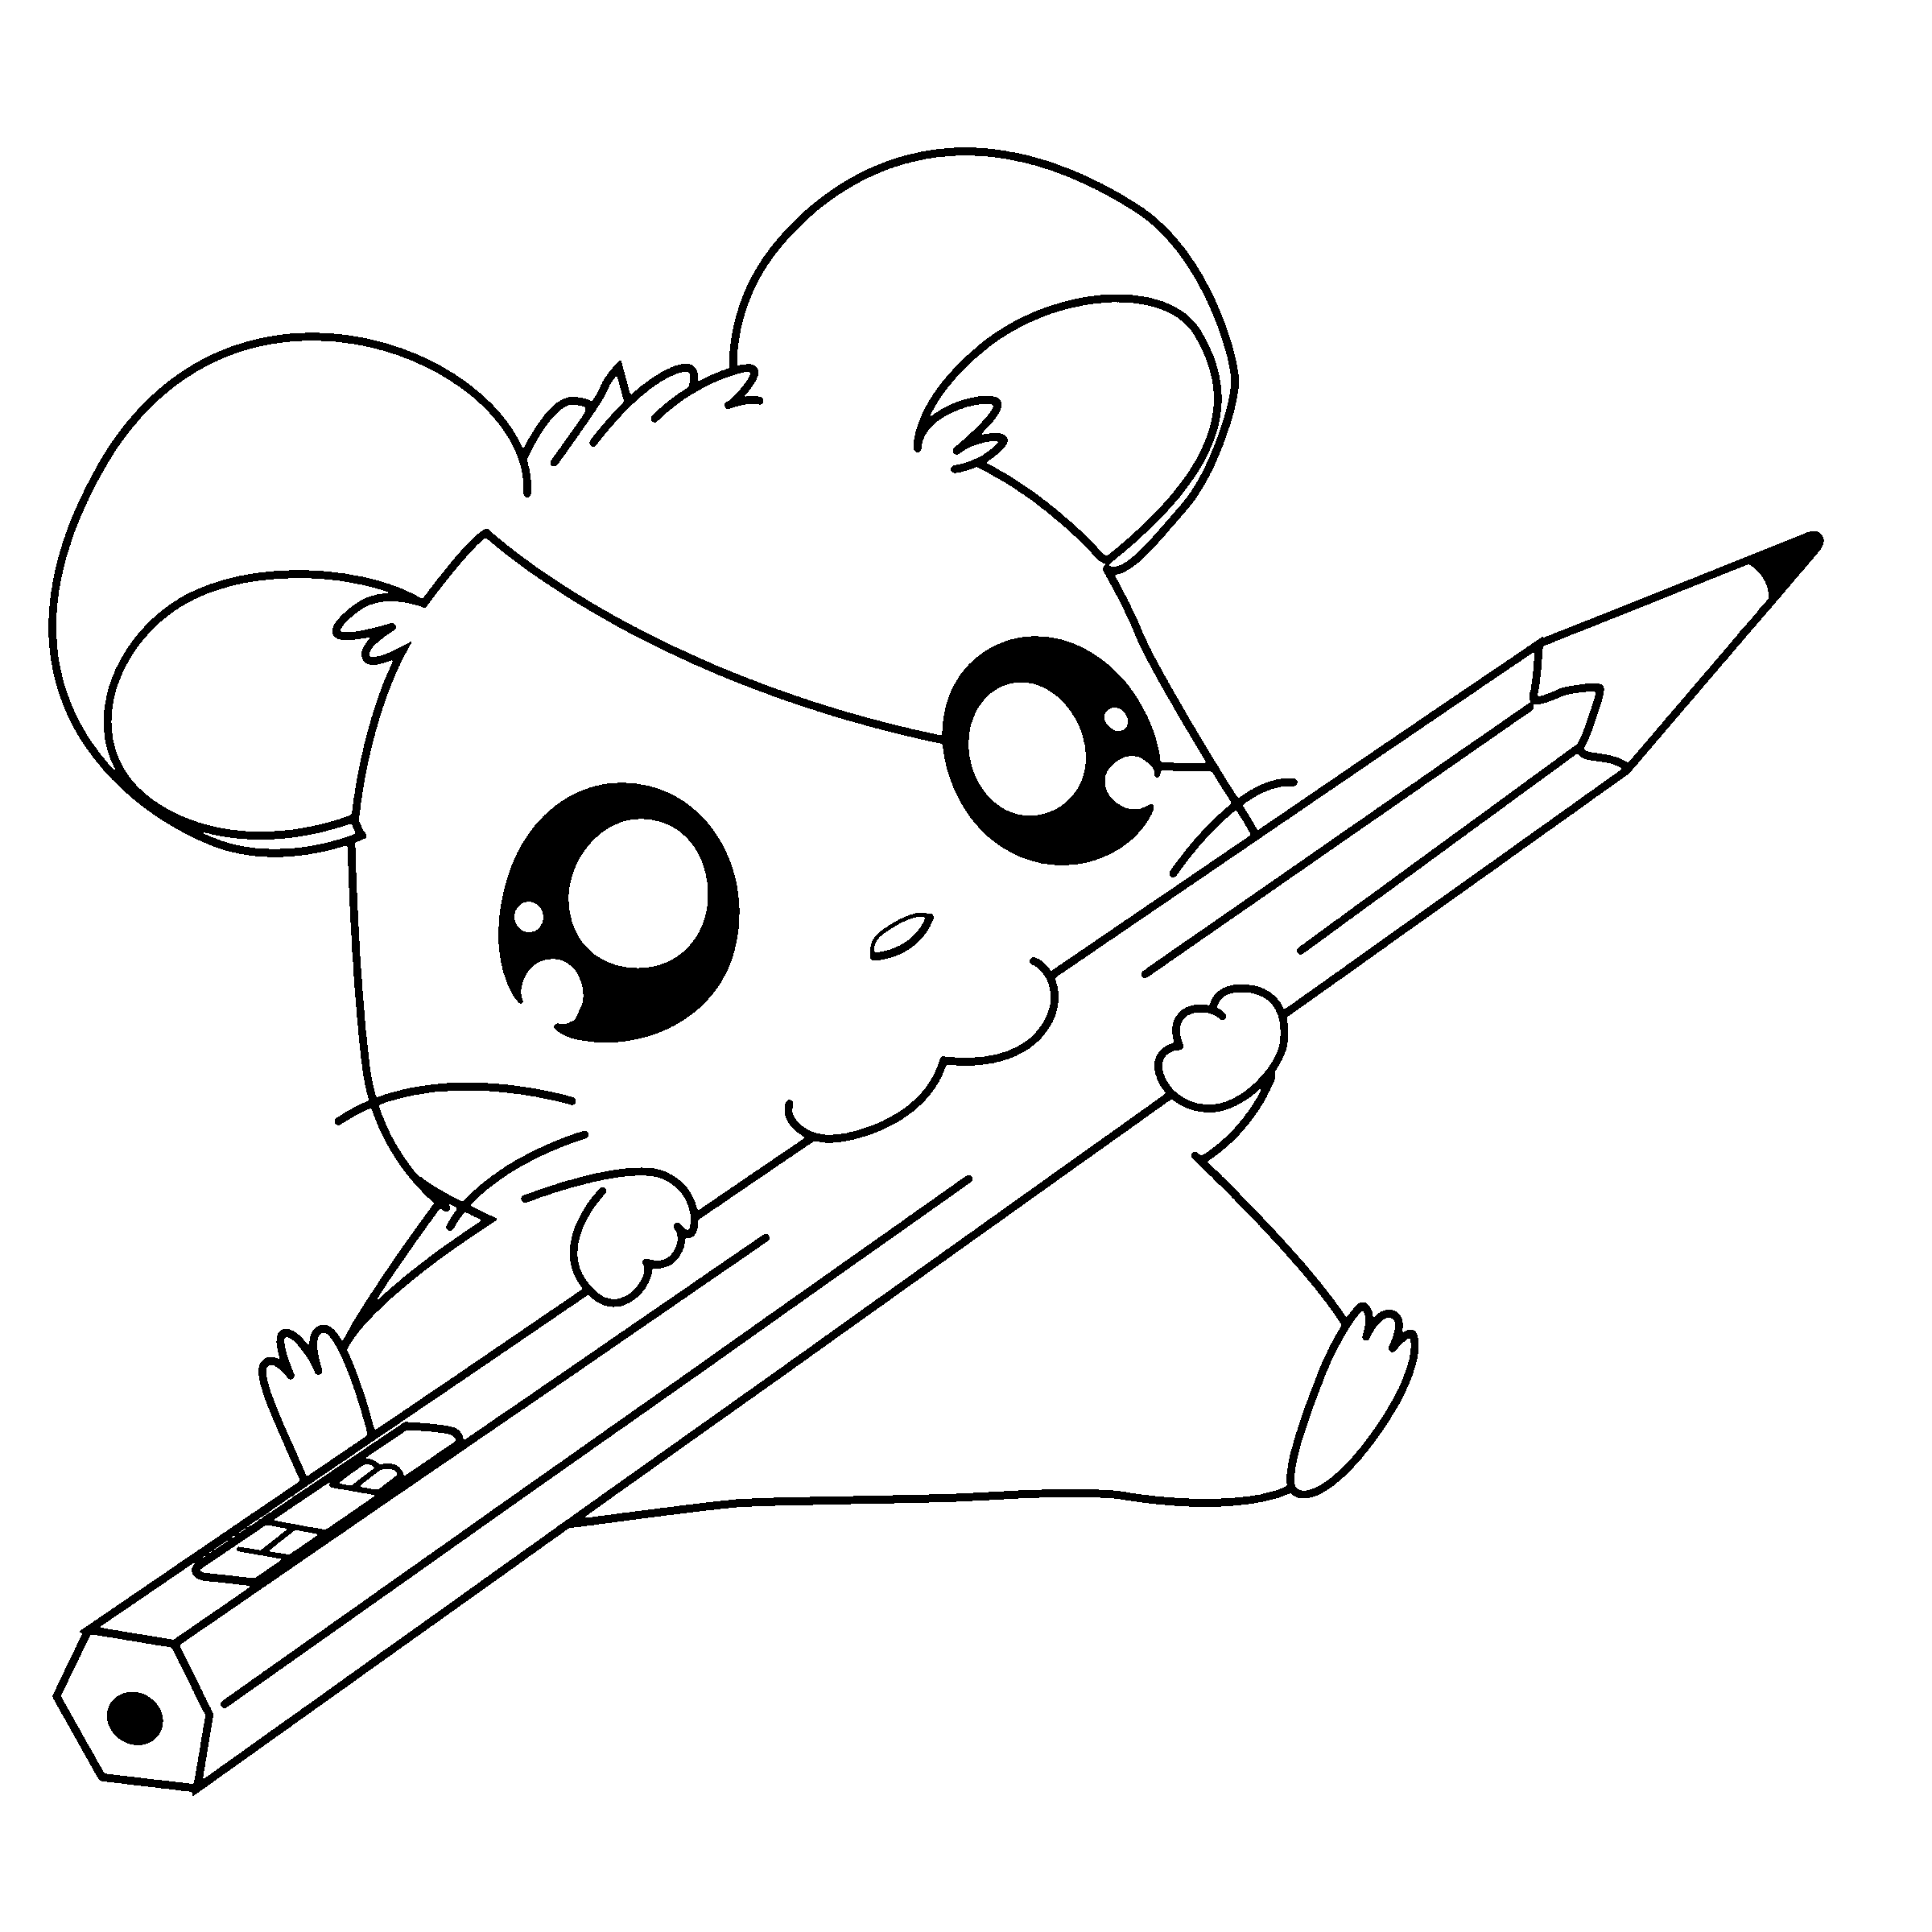 Free Printable Anime Coloring Pages for Kids